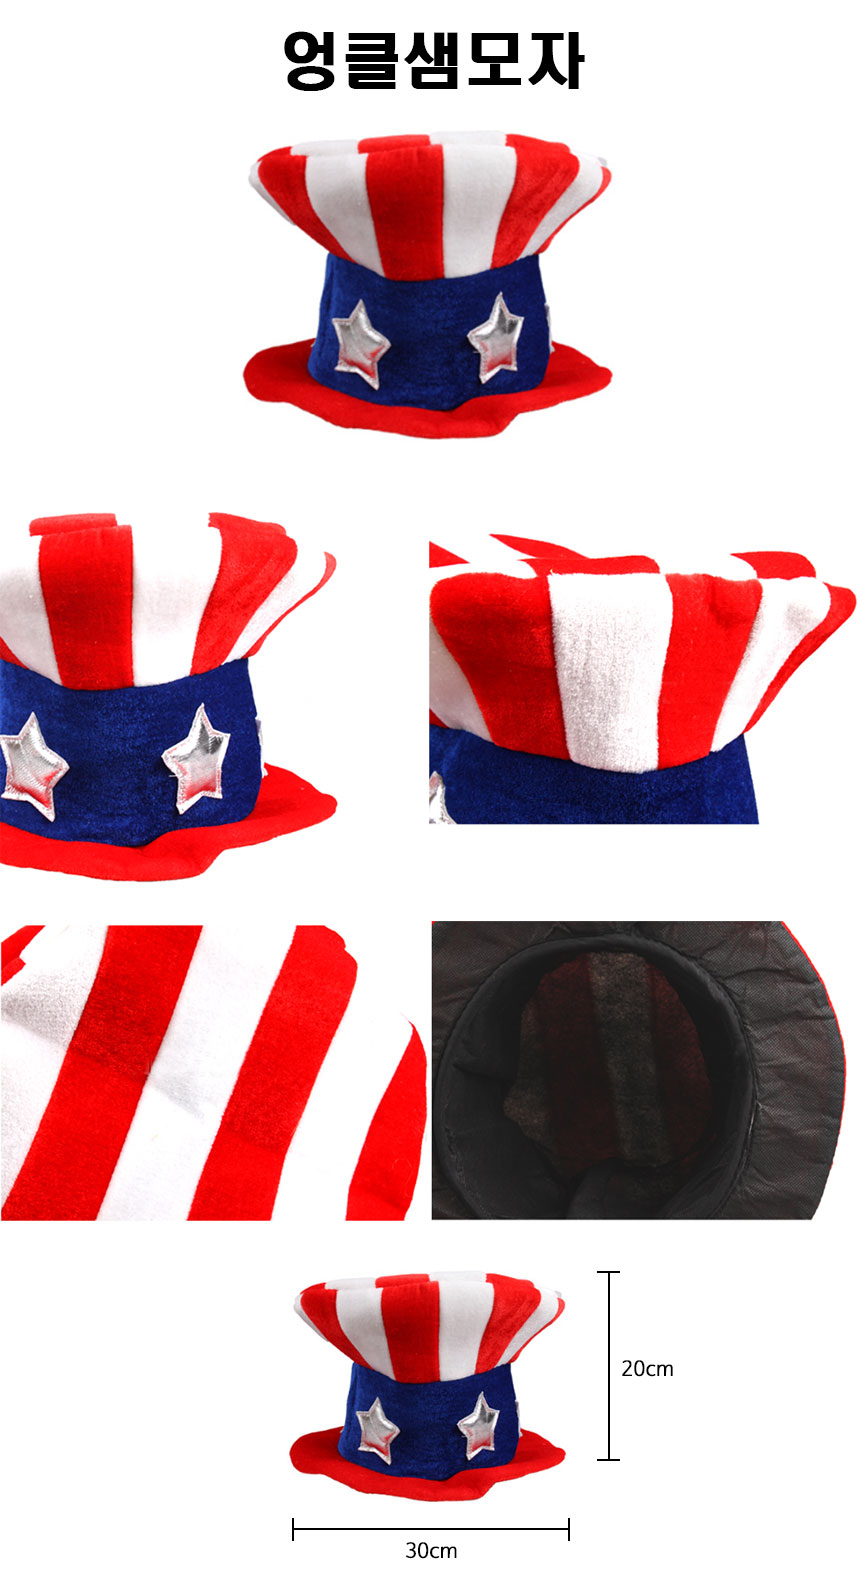 http://partyb2b.mireene.kr/img/party/hat/Uncle-Sam%27s-hat.jpg